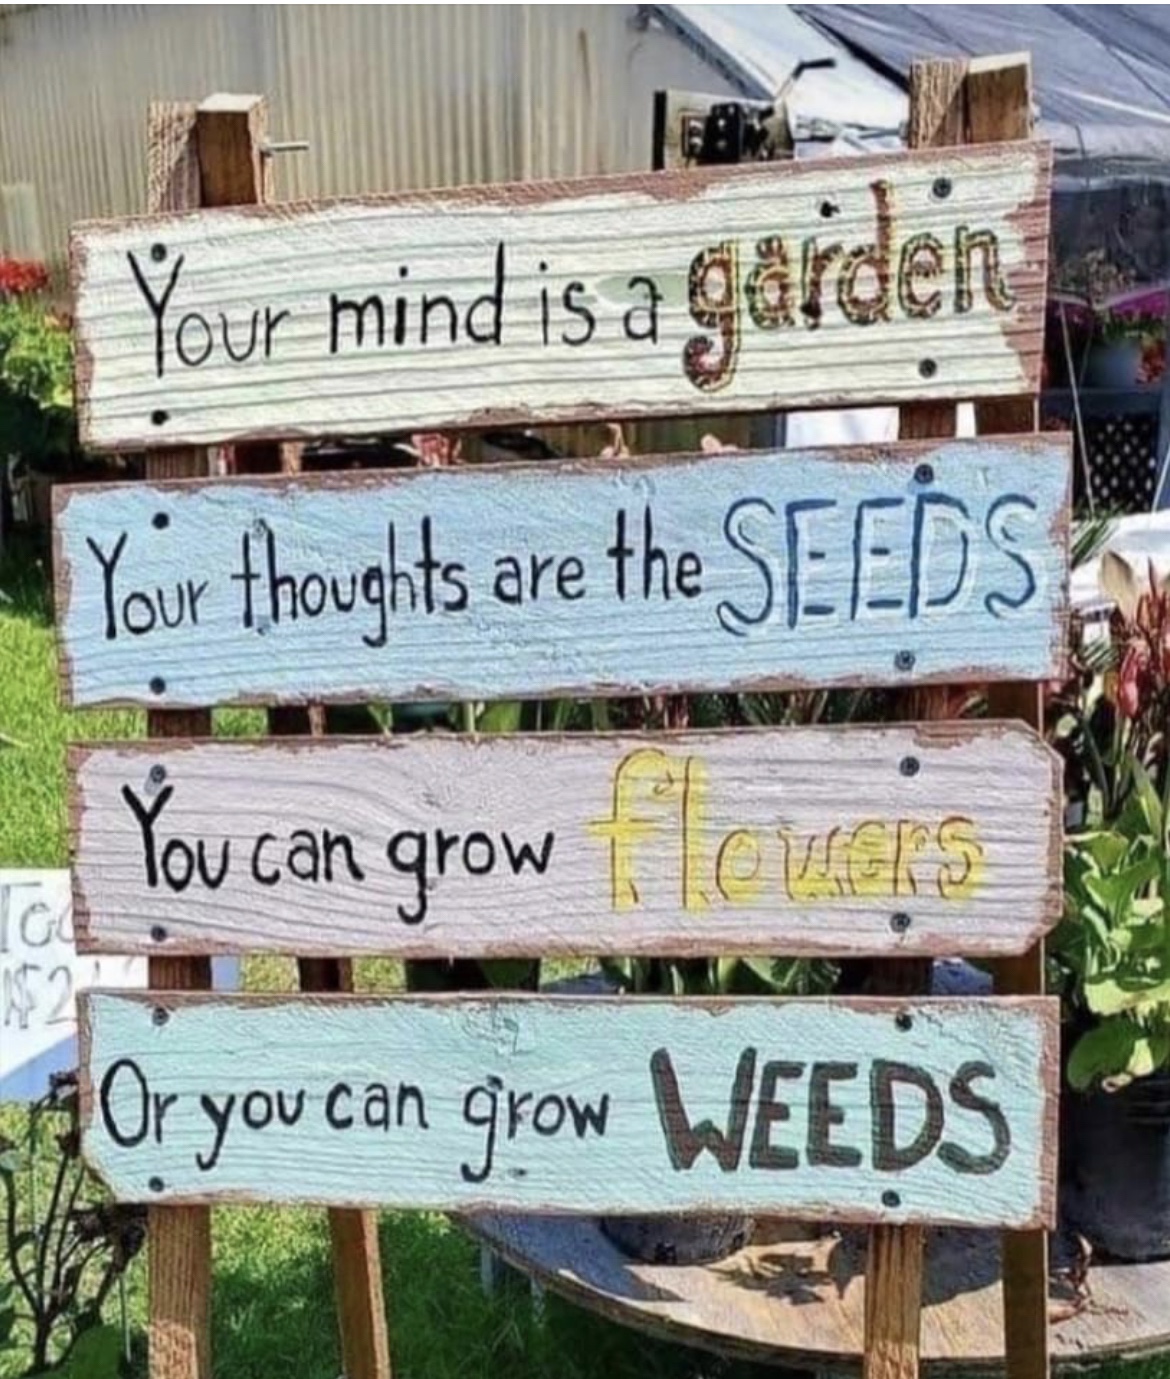 Sign board describing thoughts as seeds